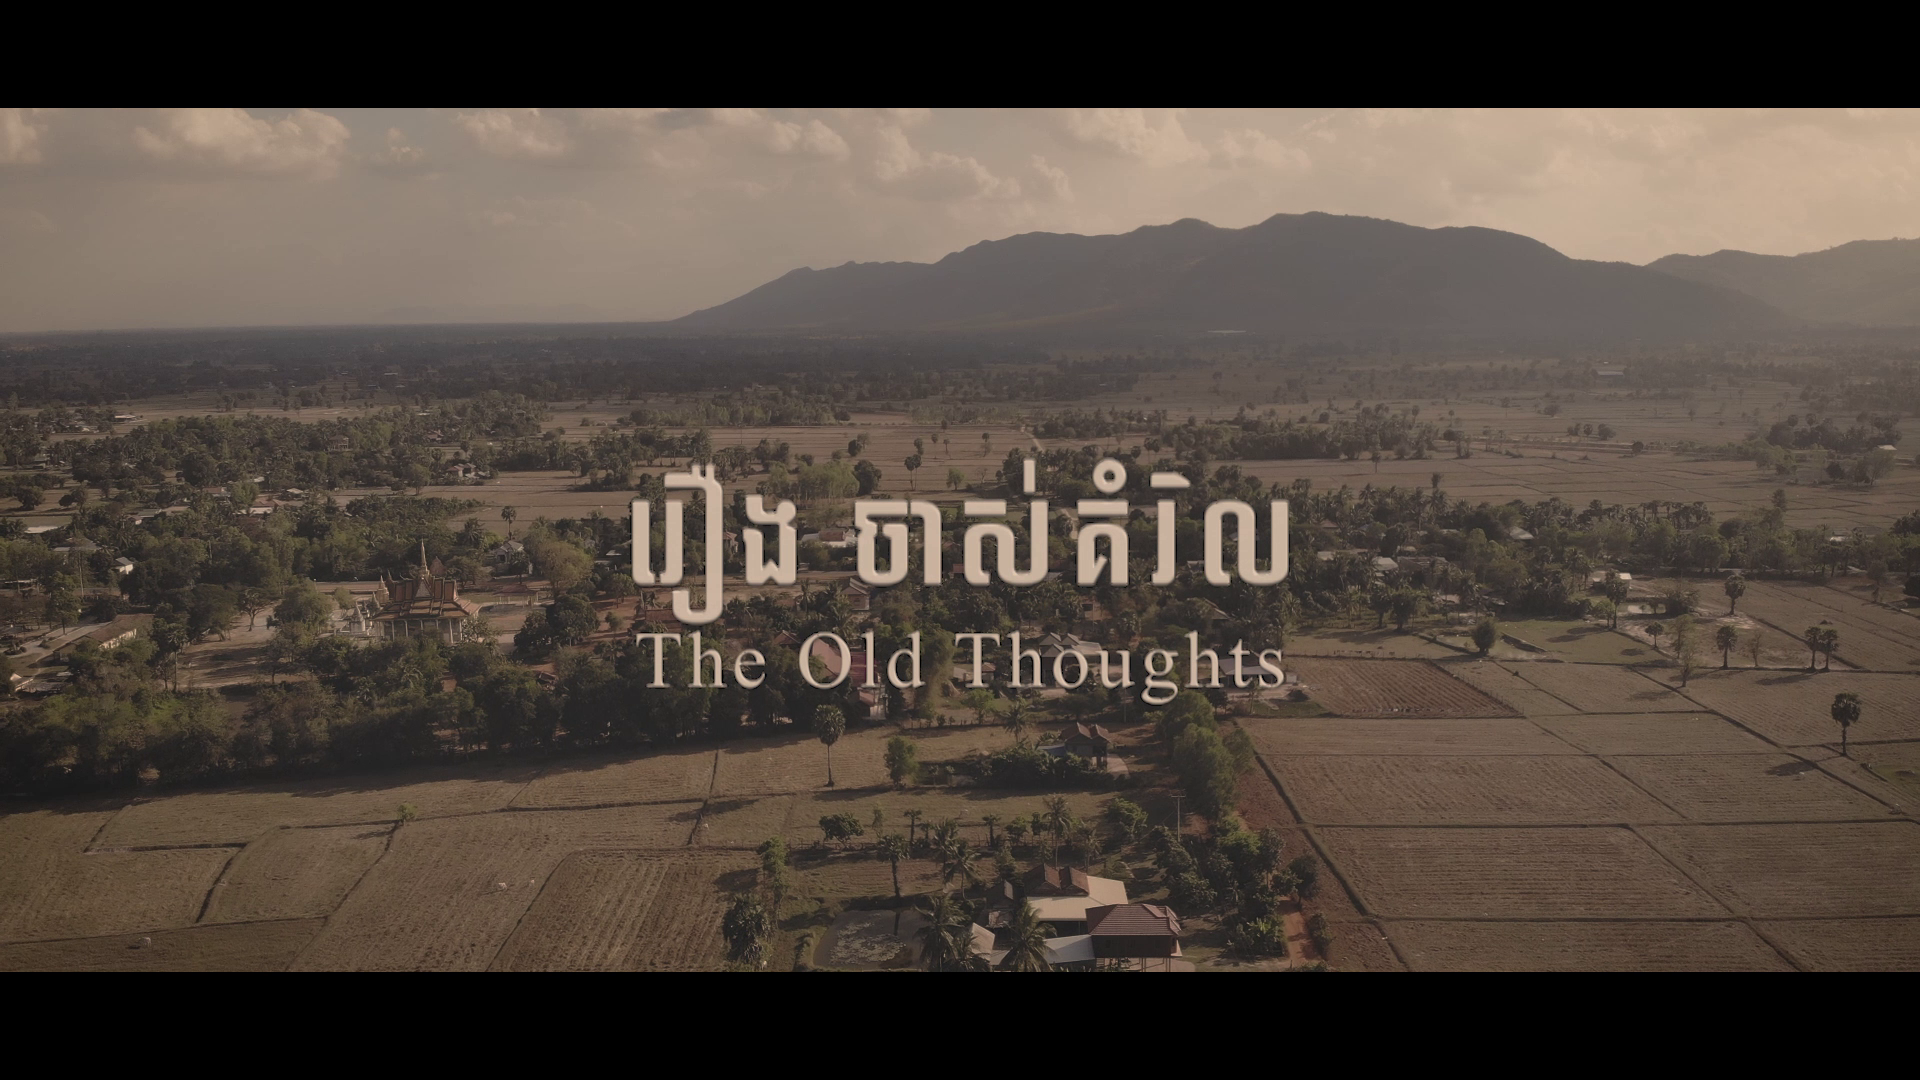 The Old Thoughts